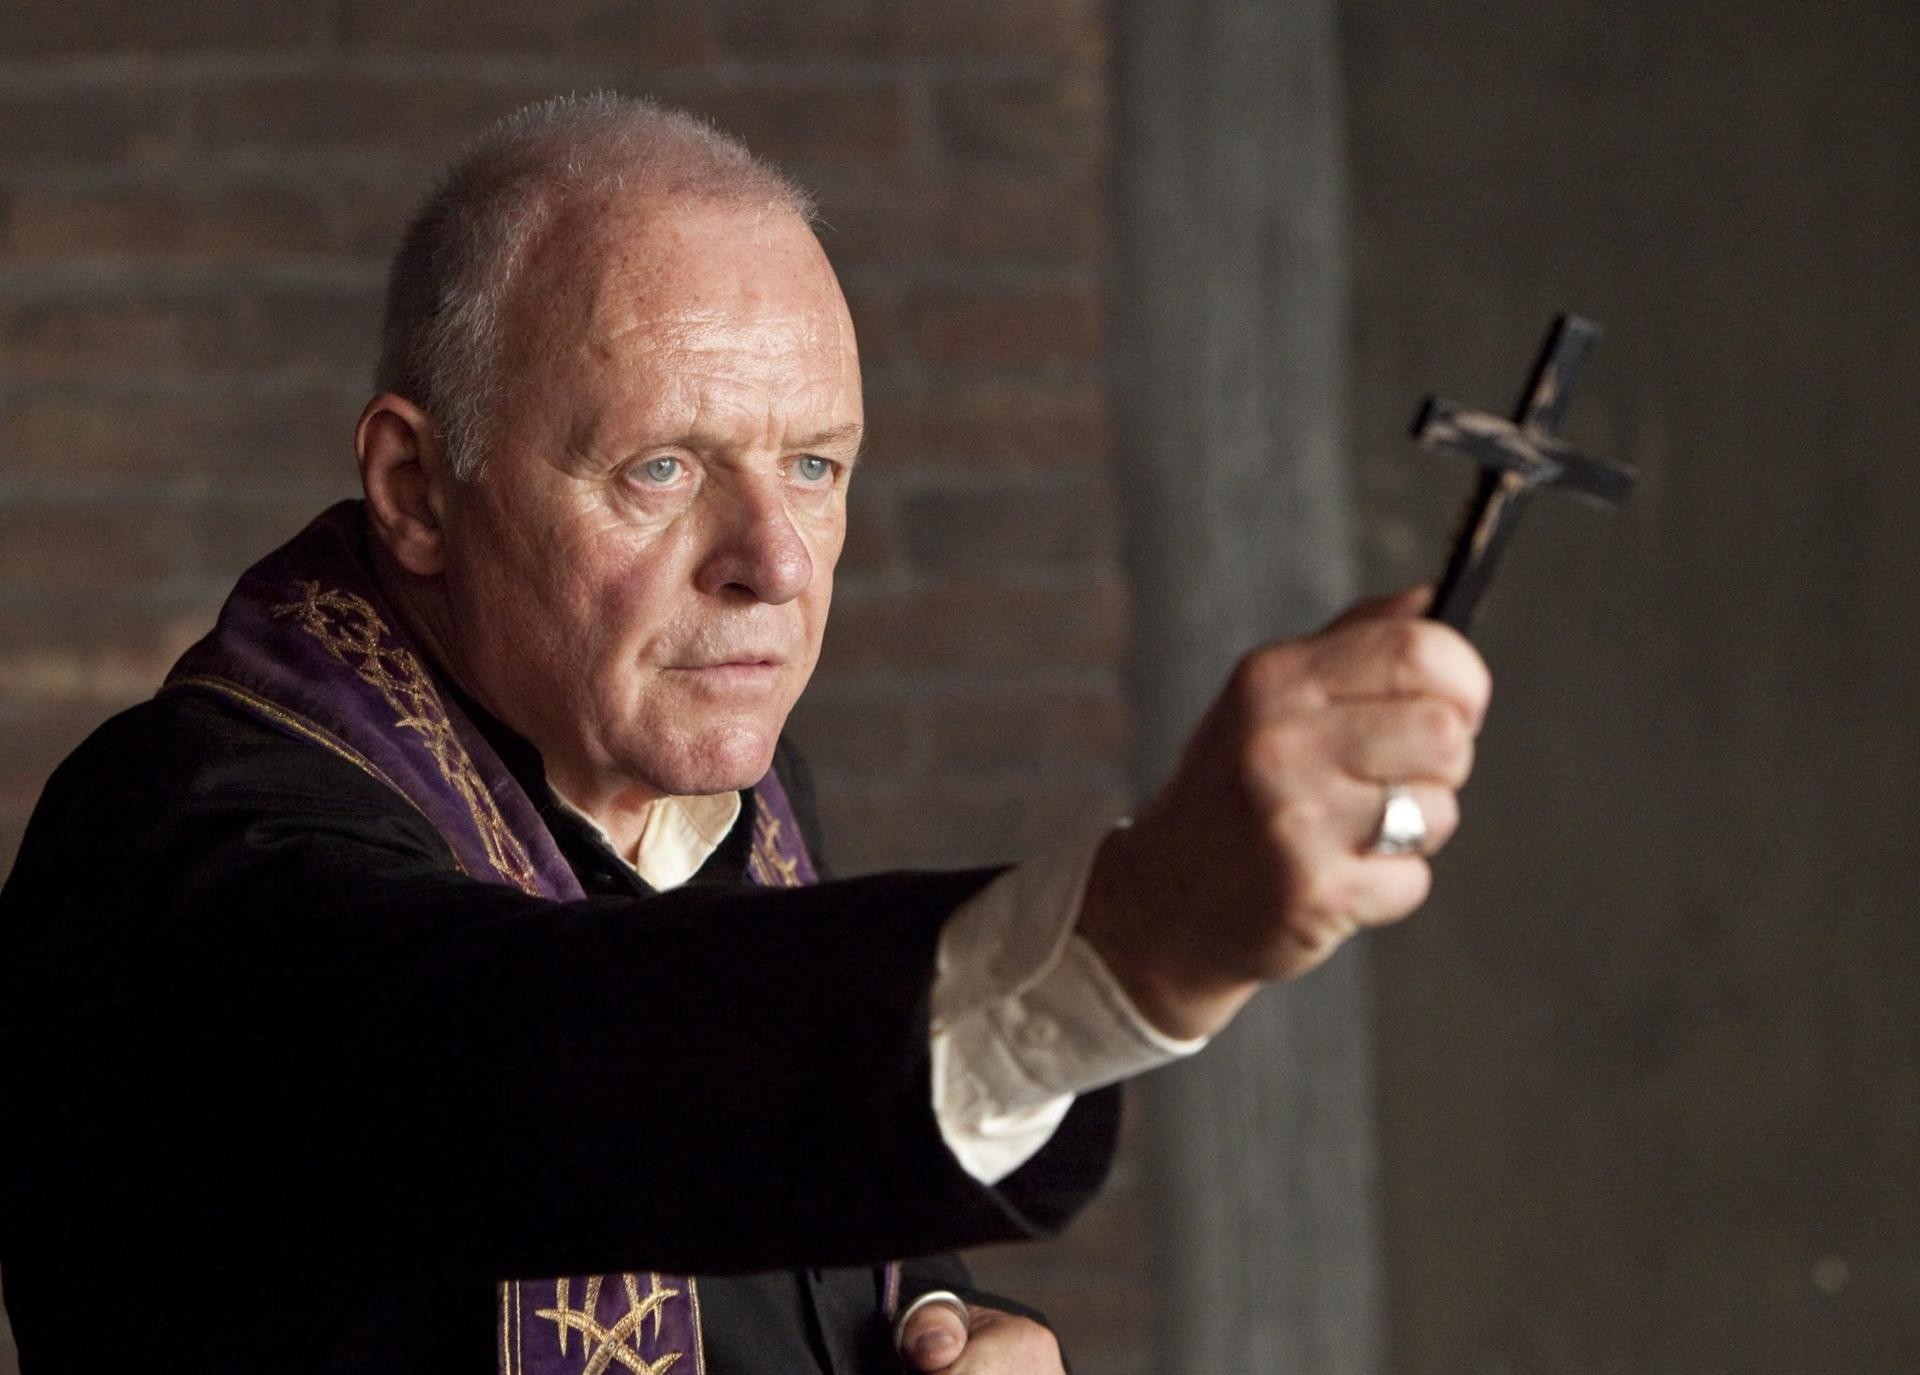 More help needed for those who feel cursed, possessed, says exorcist